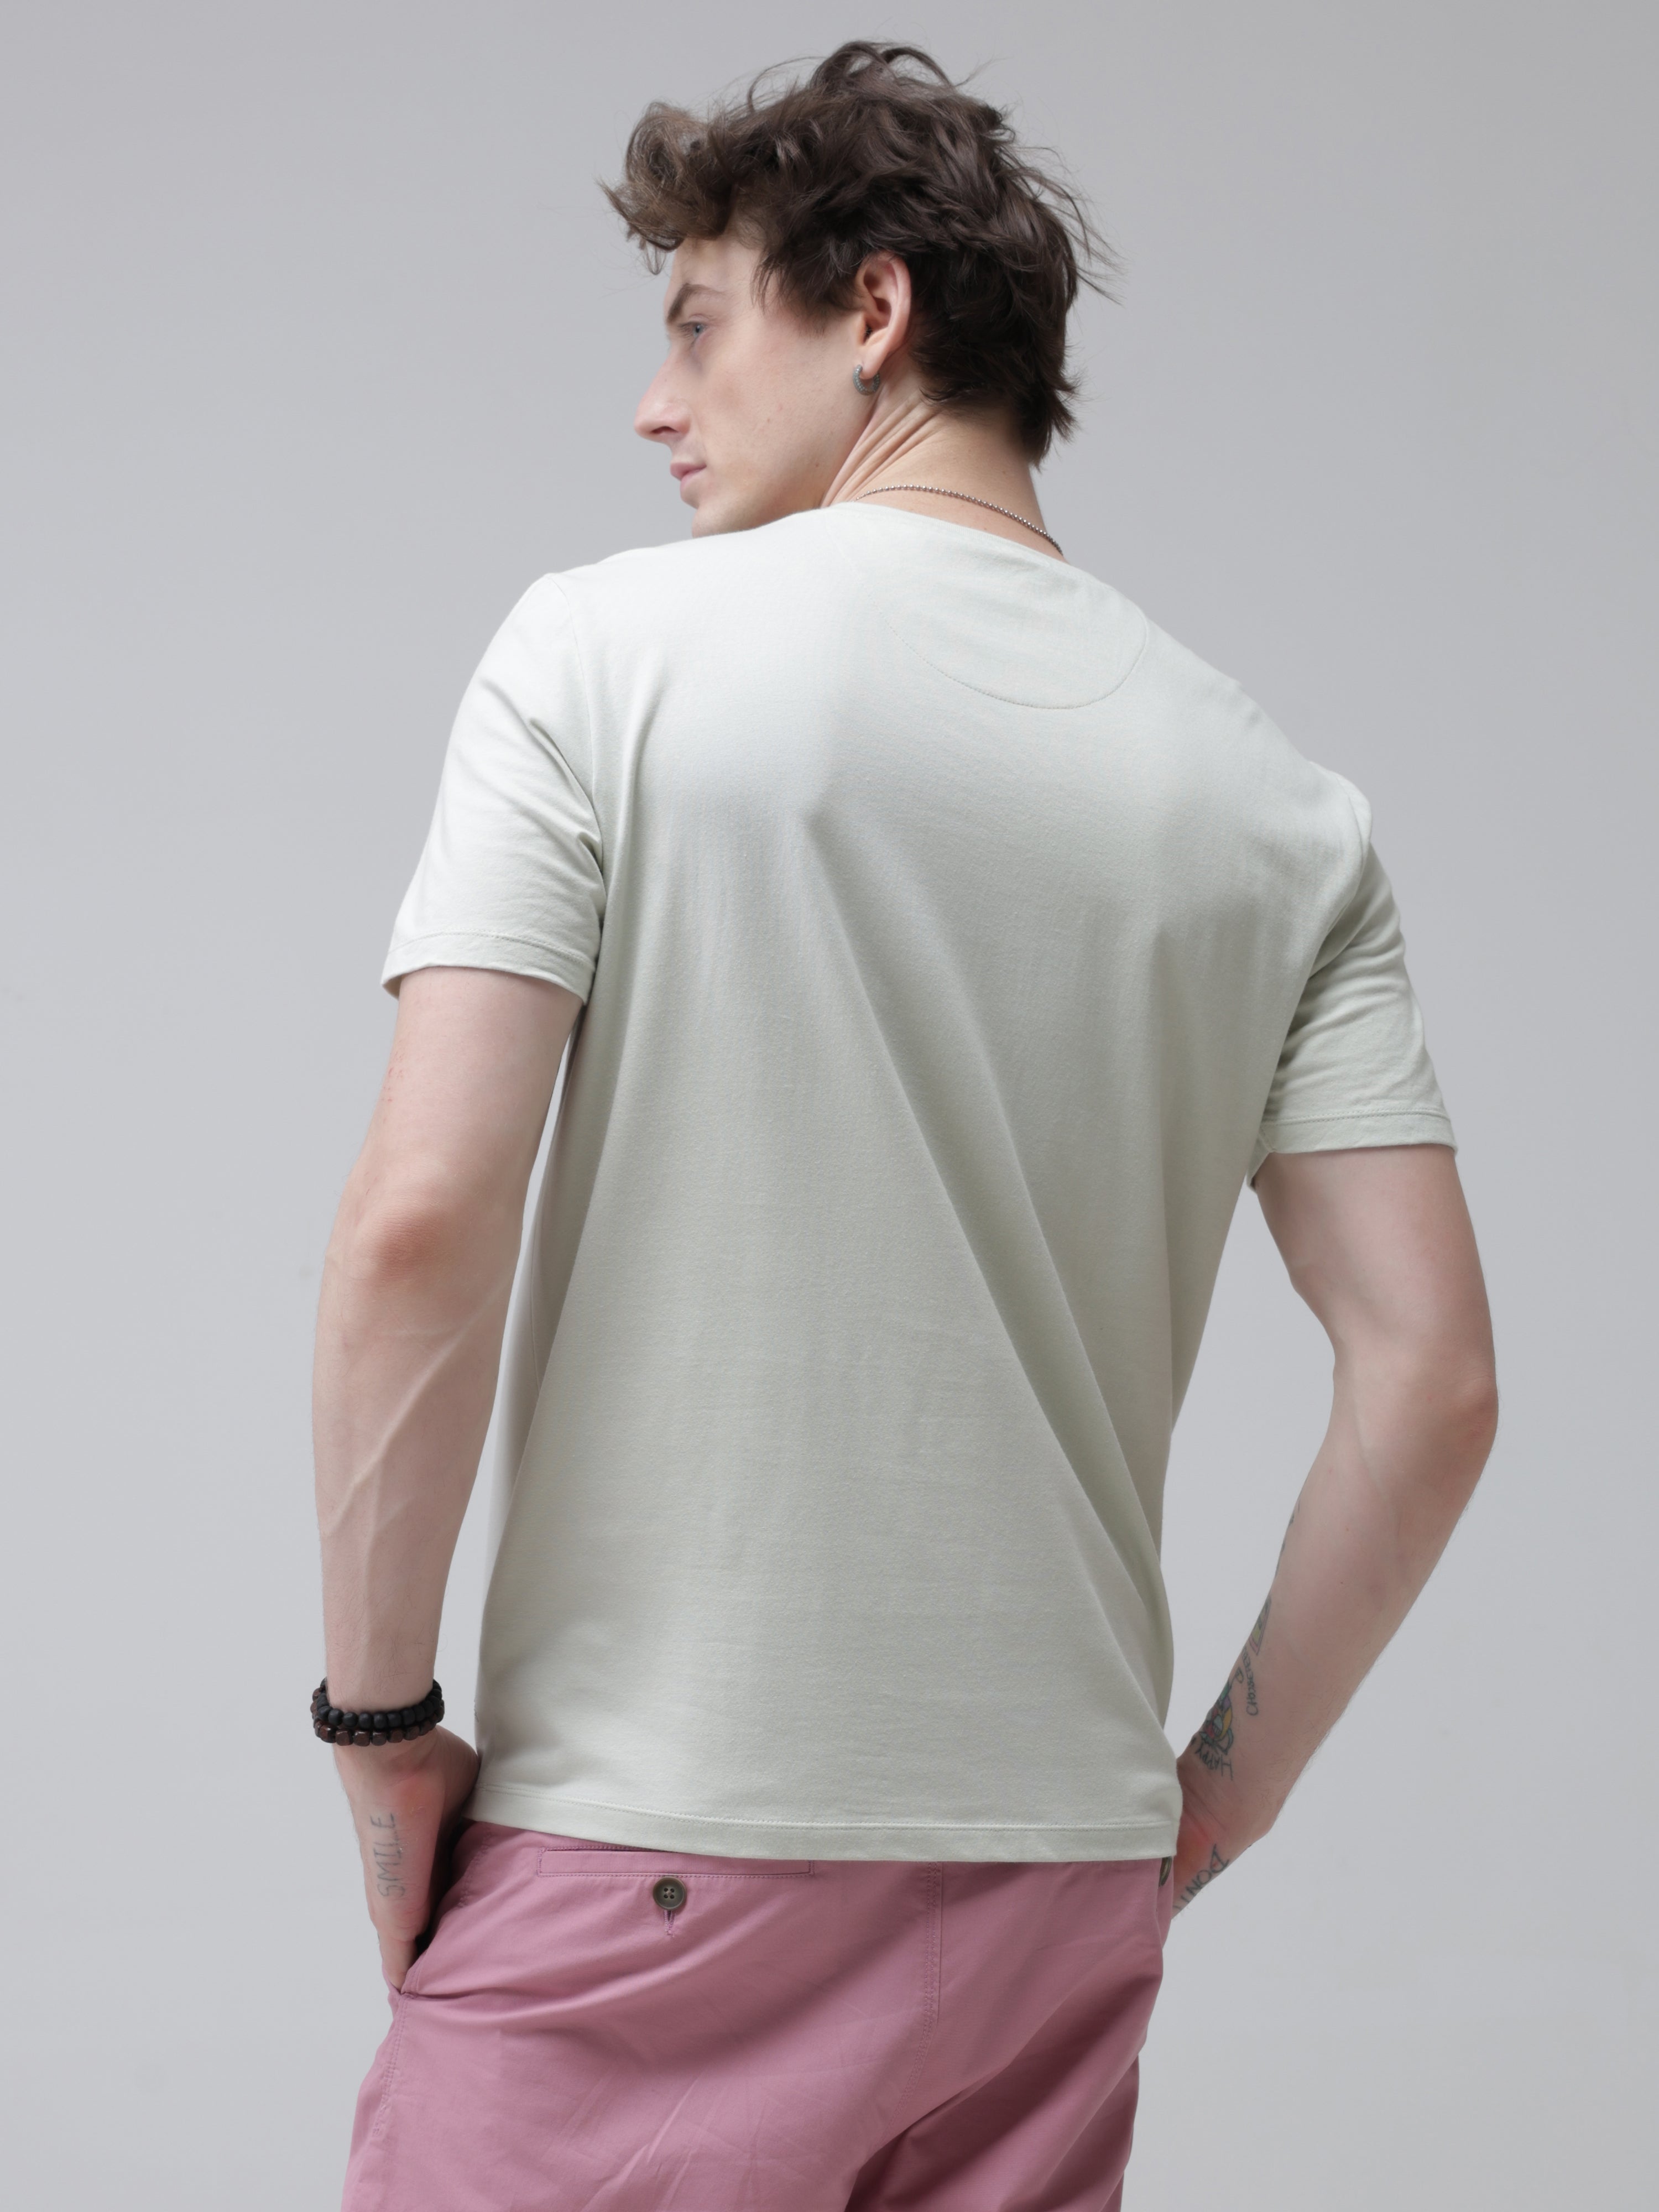 Anti-stain and anti-odor Lime Enigma round-neck Turms T-shirt, tailored fit and stretchable fabric, worn by a man, showcasing the back.